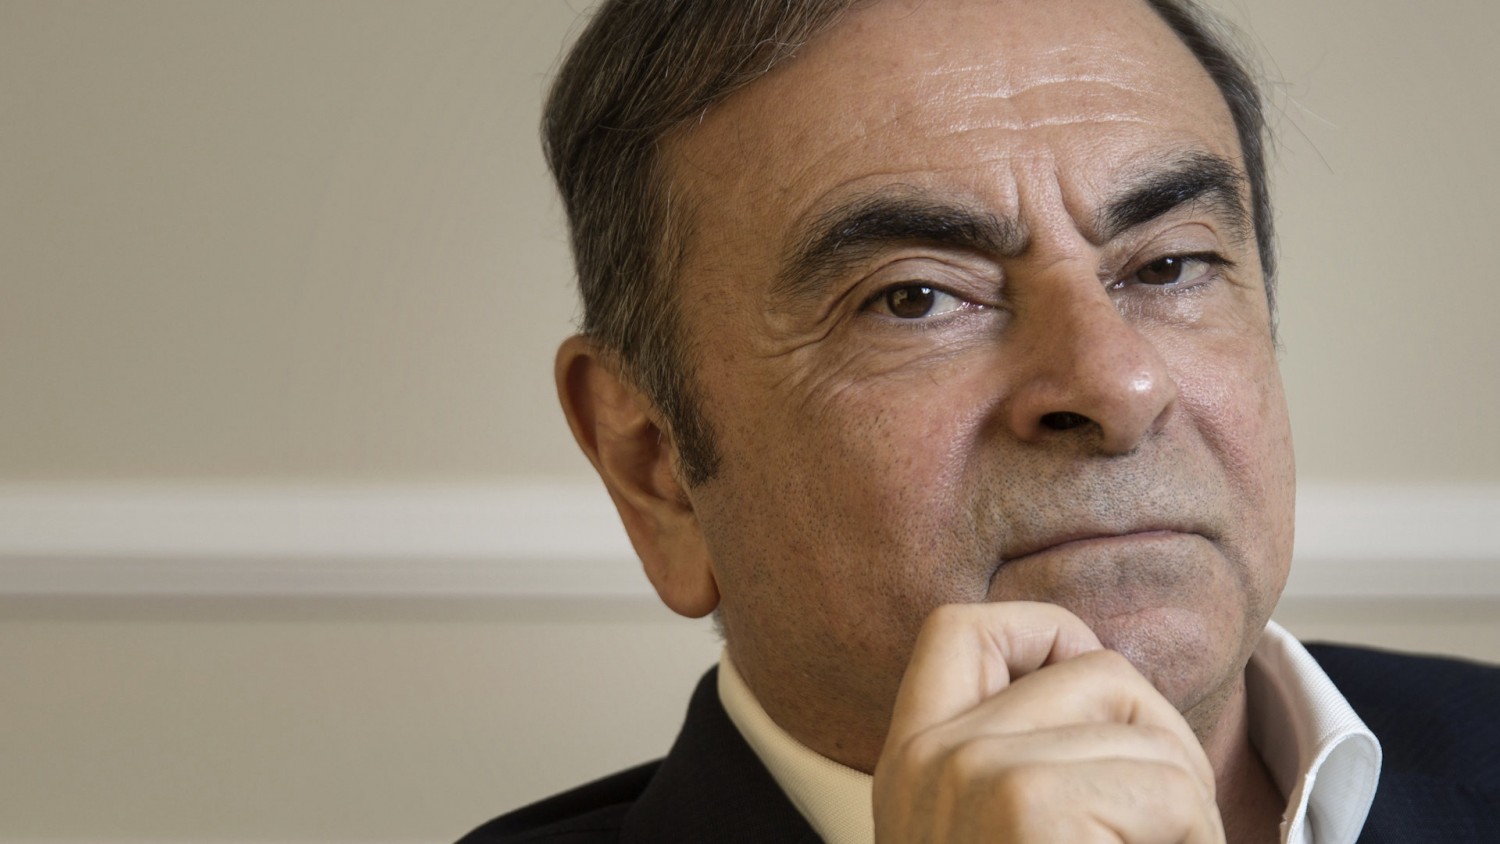 In an interview with WSJ’s Nick Kostov, Carlos Ghosn said he regrets not seizing a 2009 opportunity to work in the U.S., where he wouldn’t have been “crucified” for his pay. The former auto executive recently escaped Japan, where he faces charges of finan